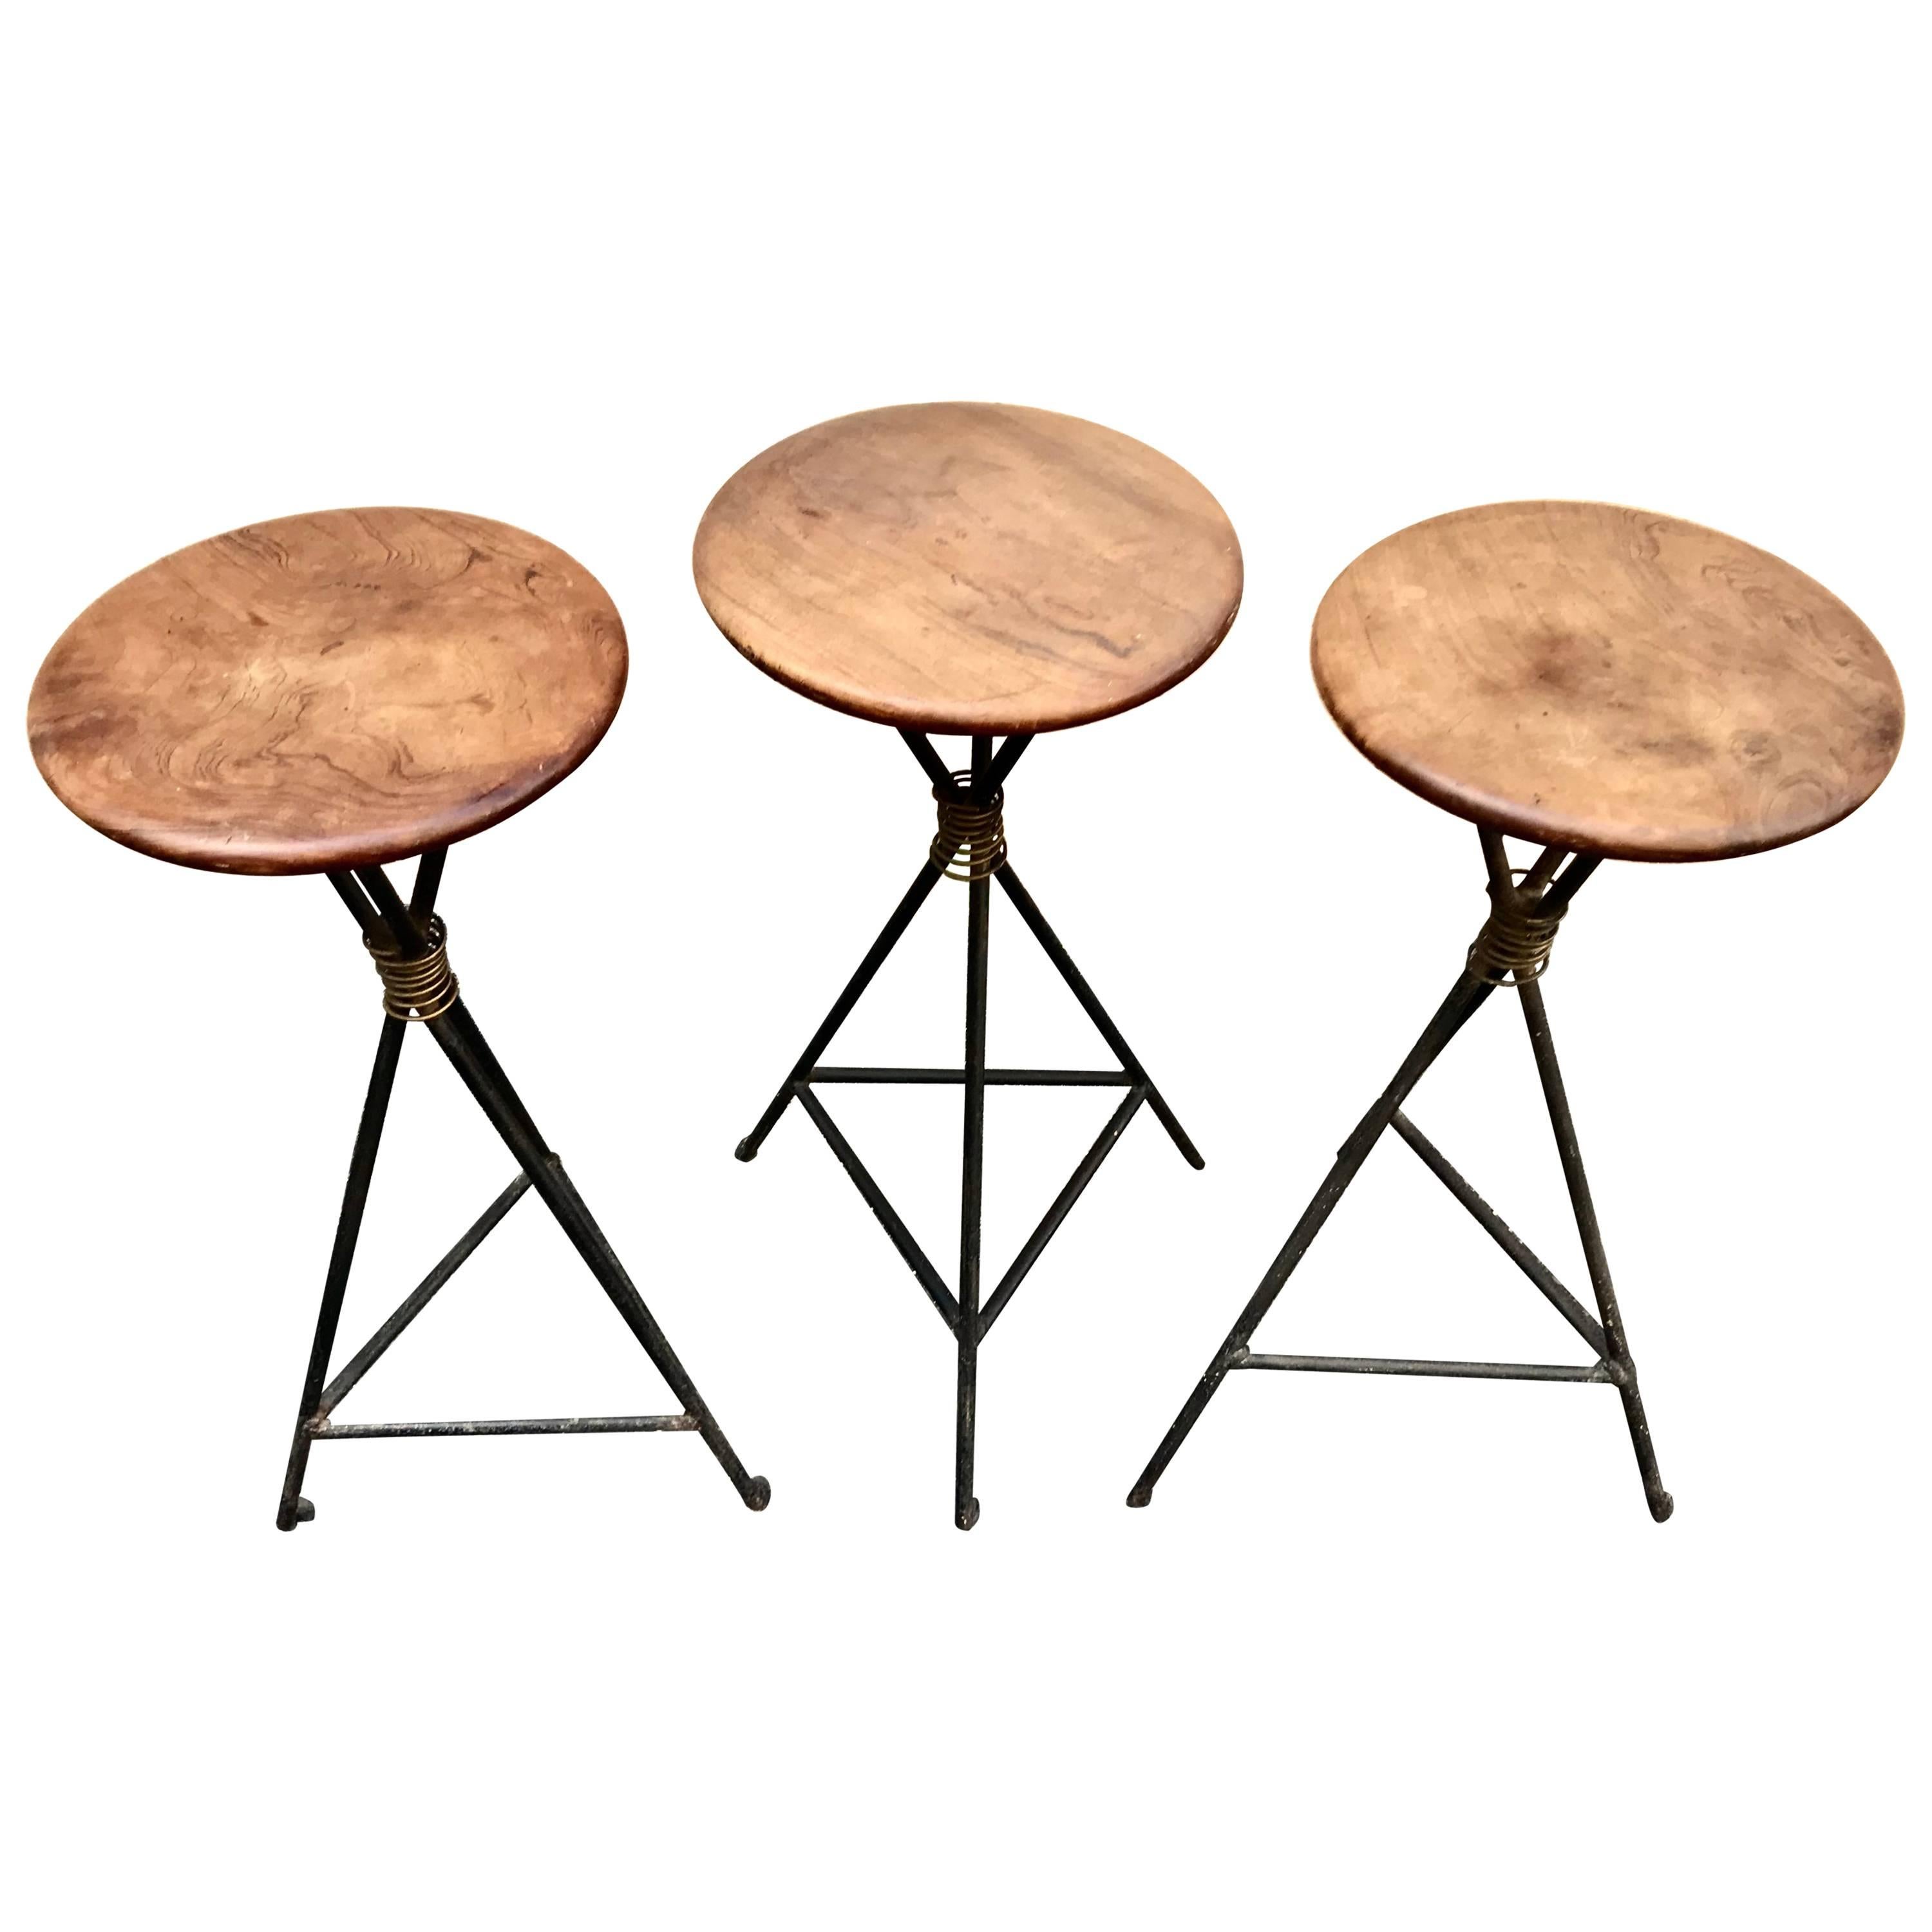 Chic Set of Three 1950s French Walnut and Wrought Iron Barstools